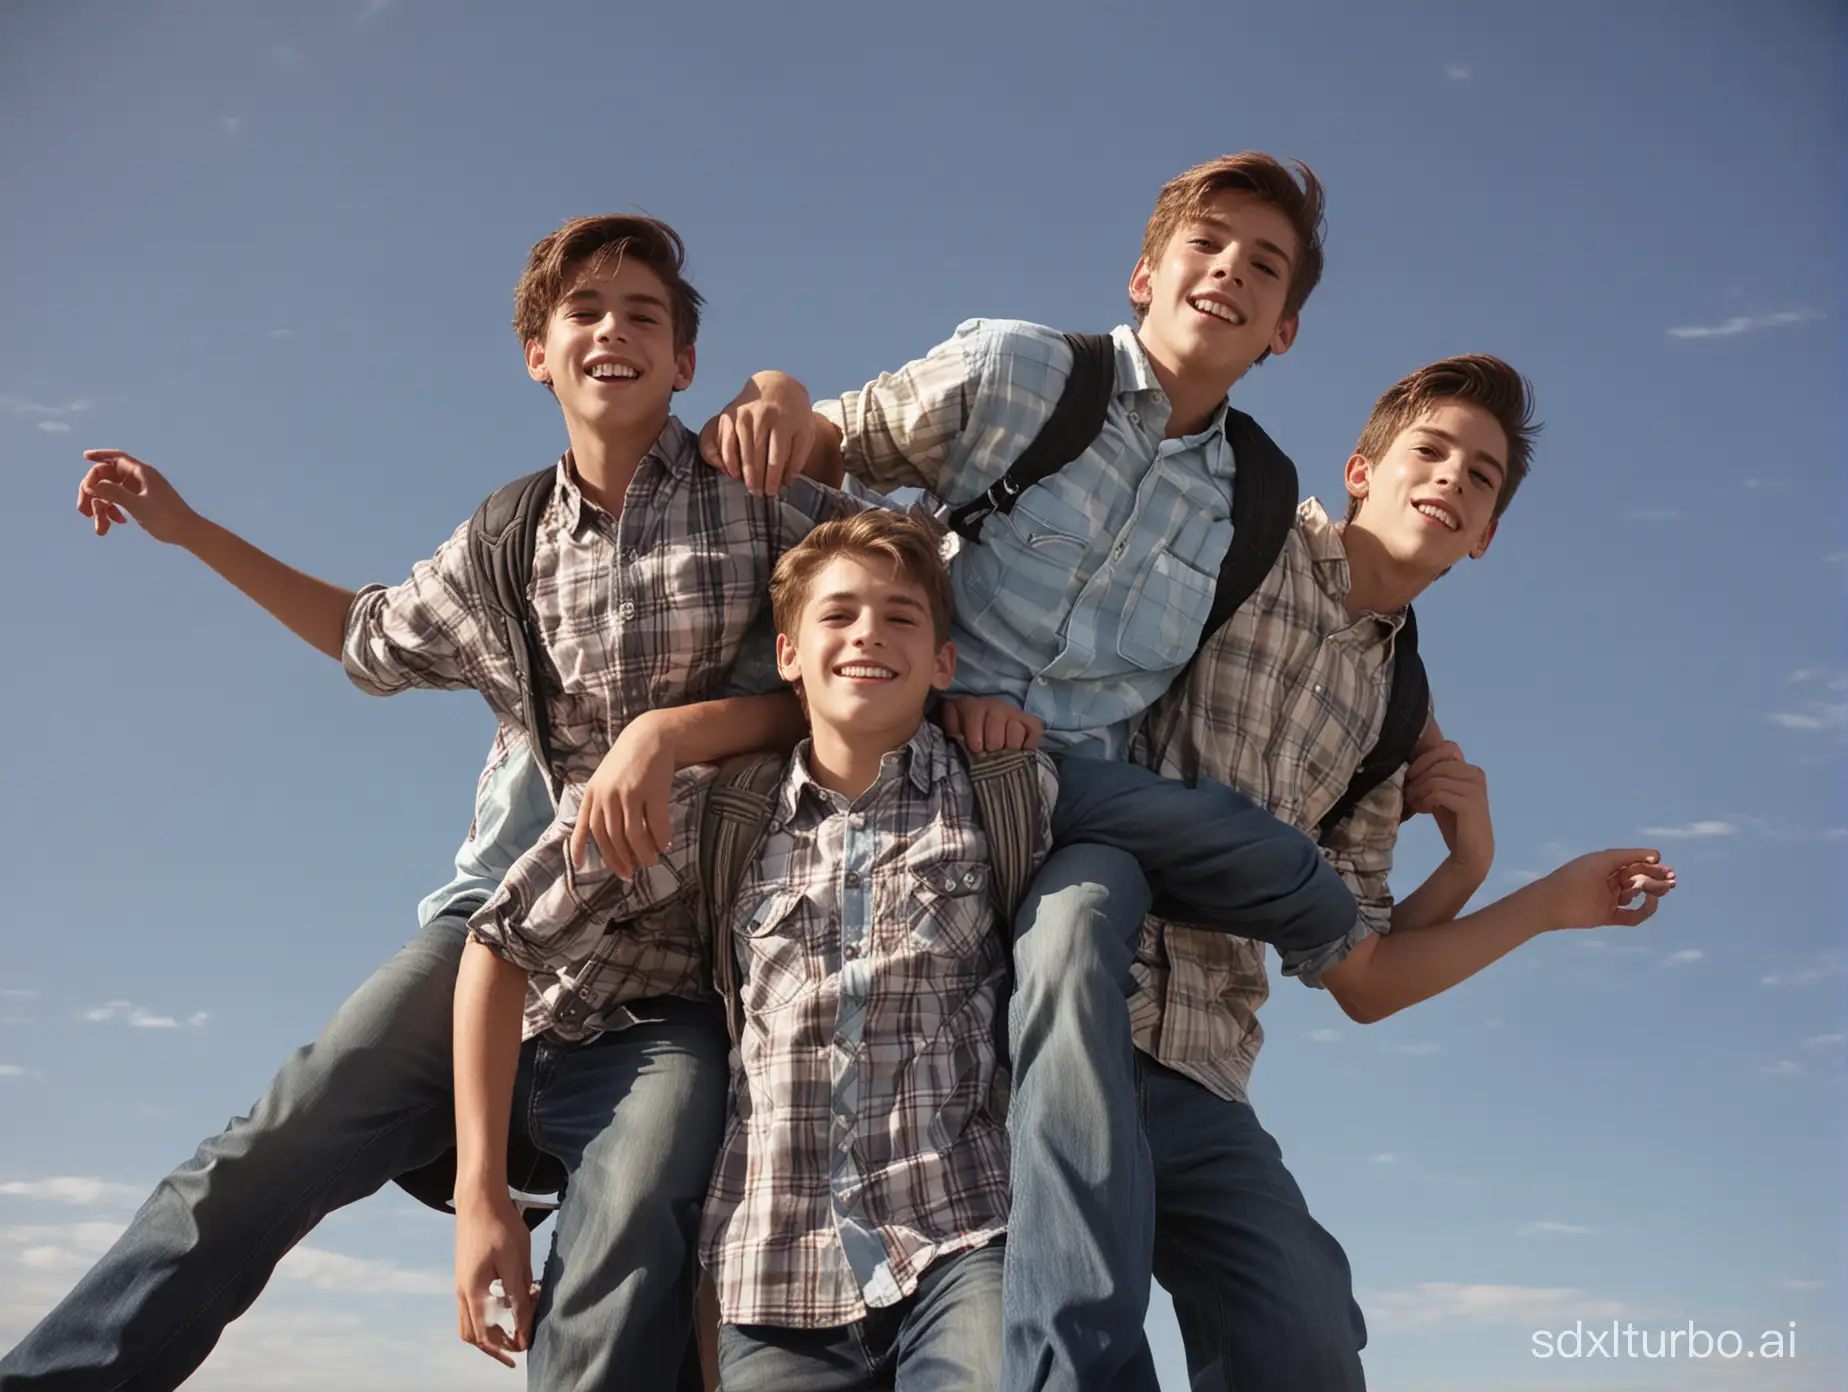 Teen-Model-Boys-Piggyback-Riding-in-Low-Angle-Shot